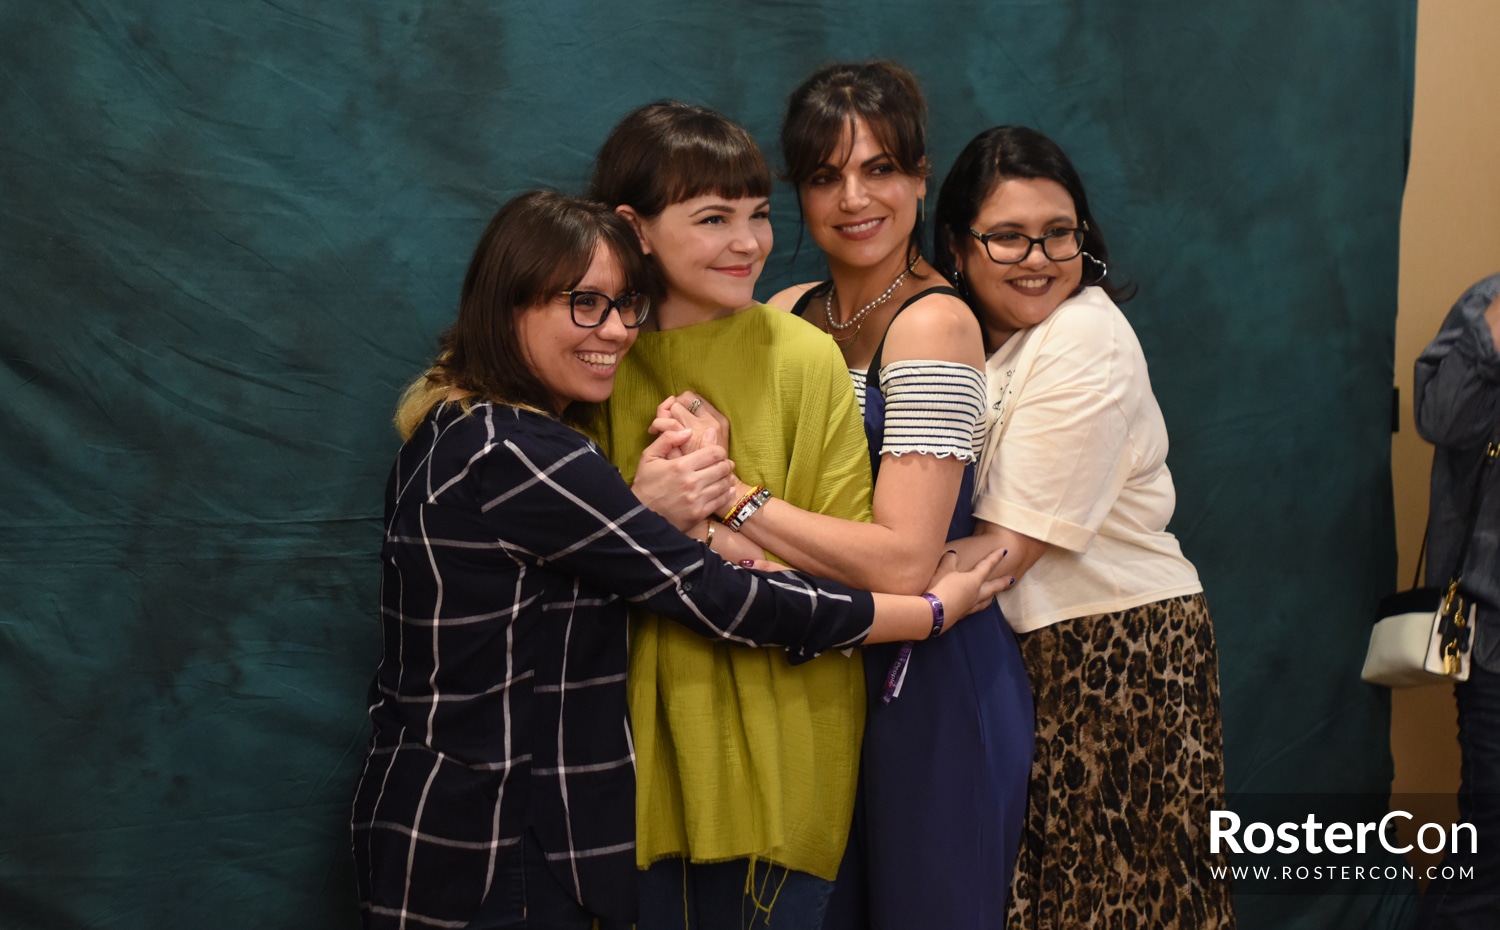 Ginnifer Goodwin & Lana Parrilla - The Happy Ending Convention 3 - Once Upon A Time